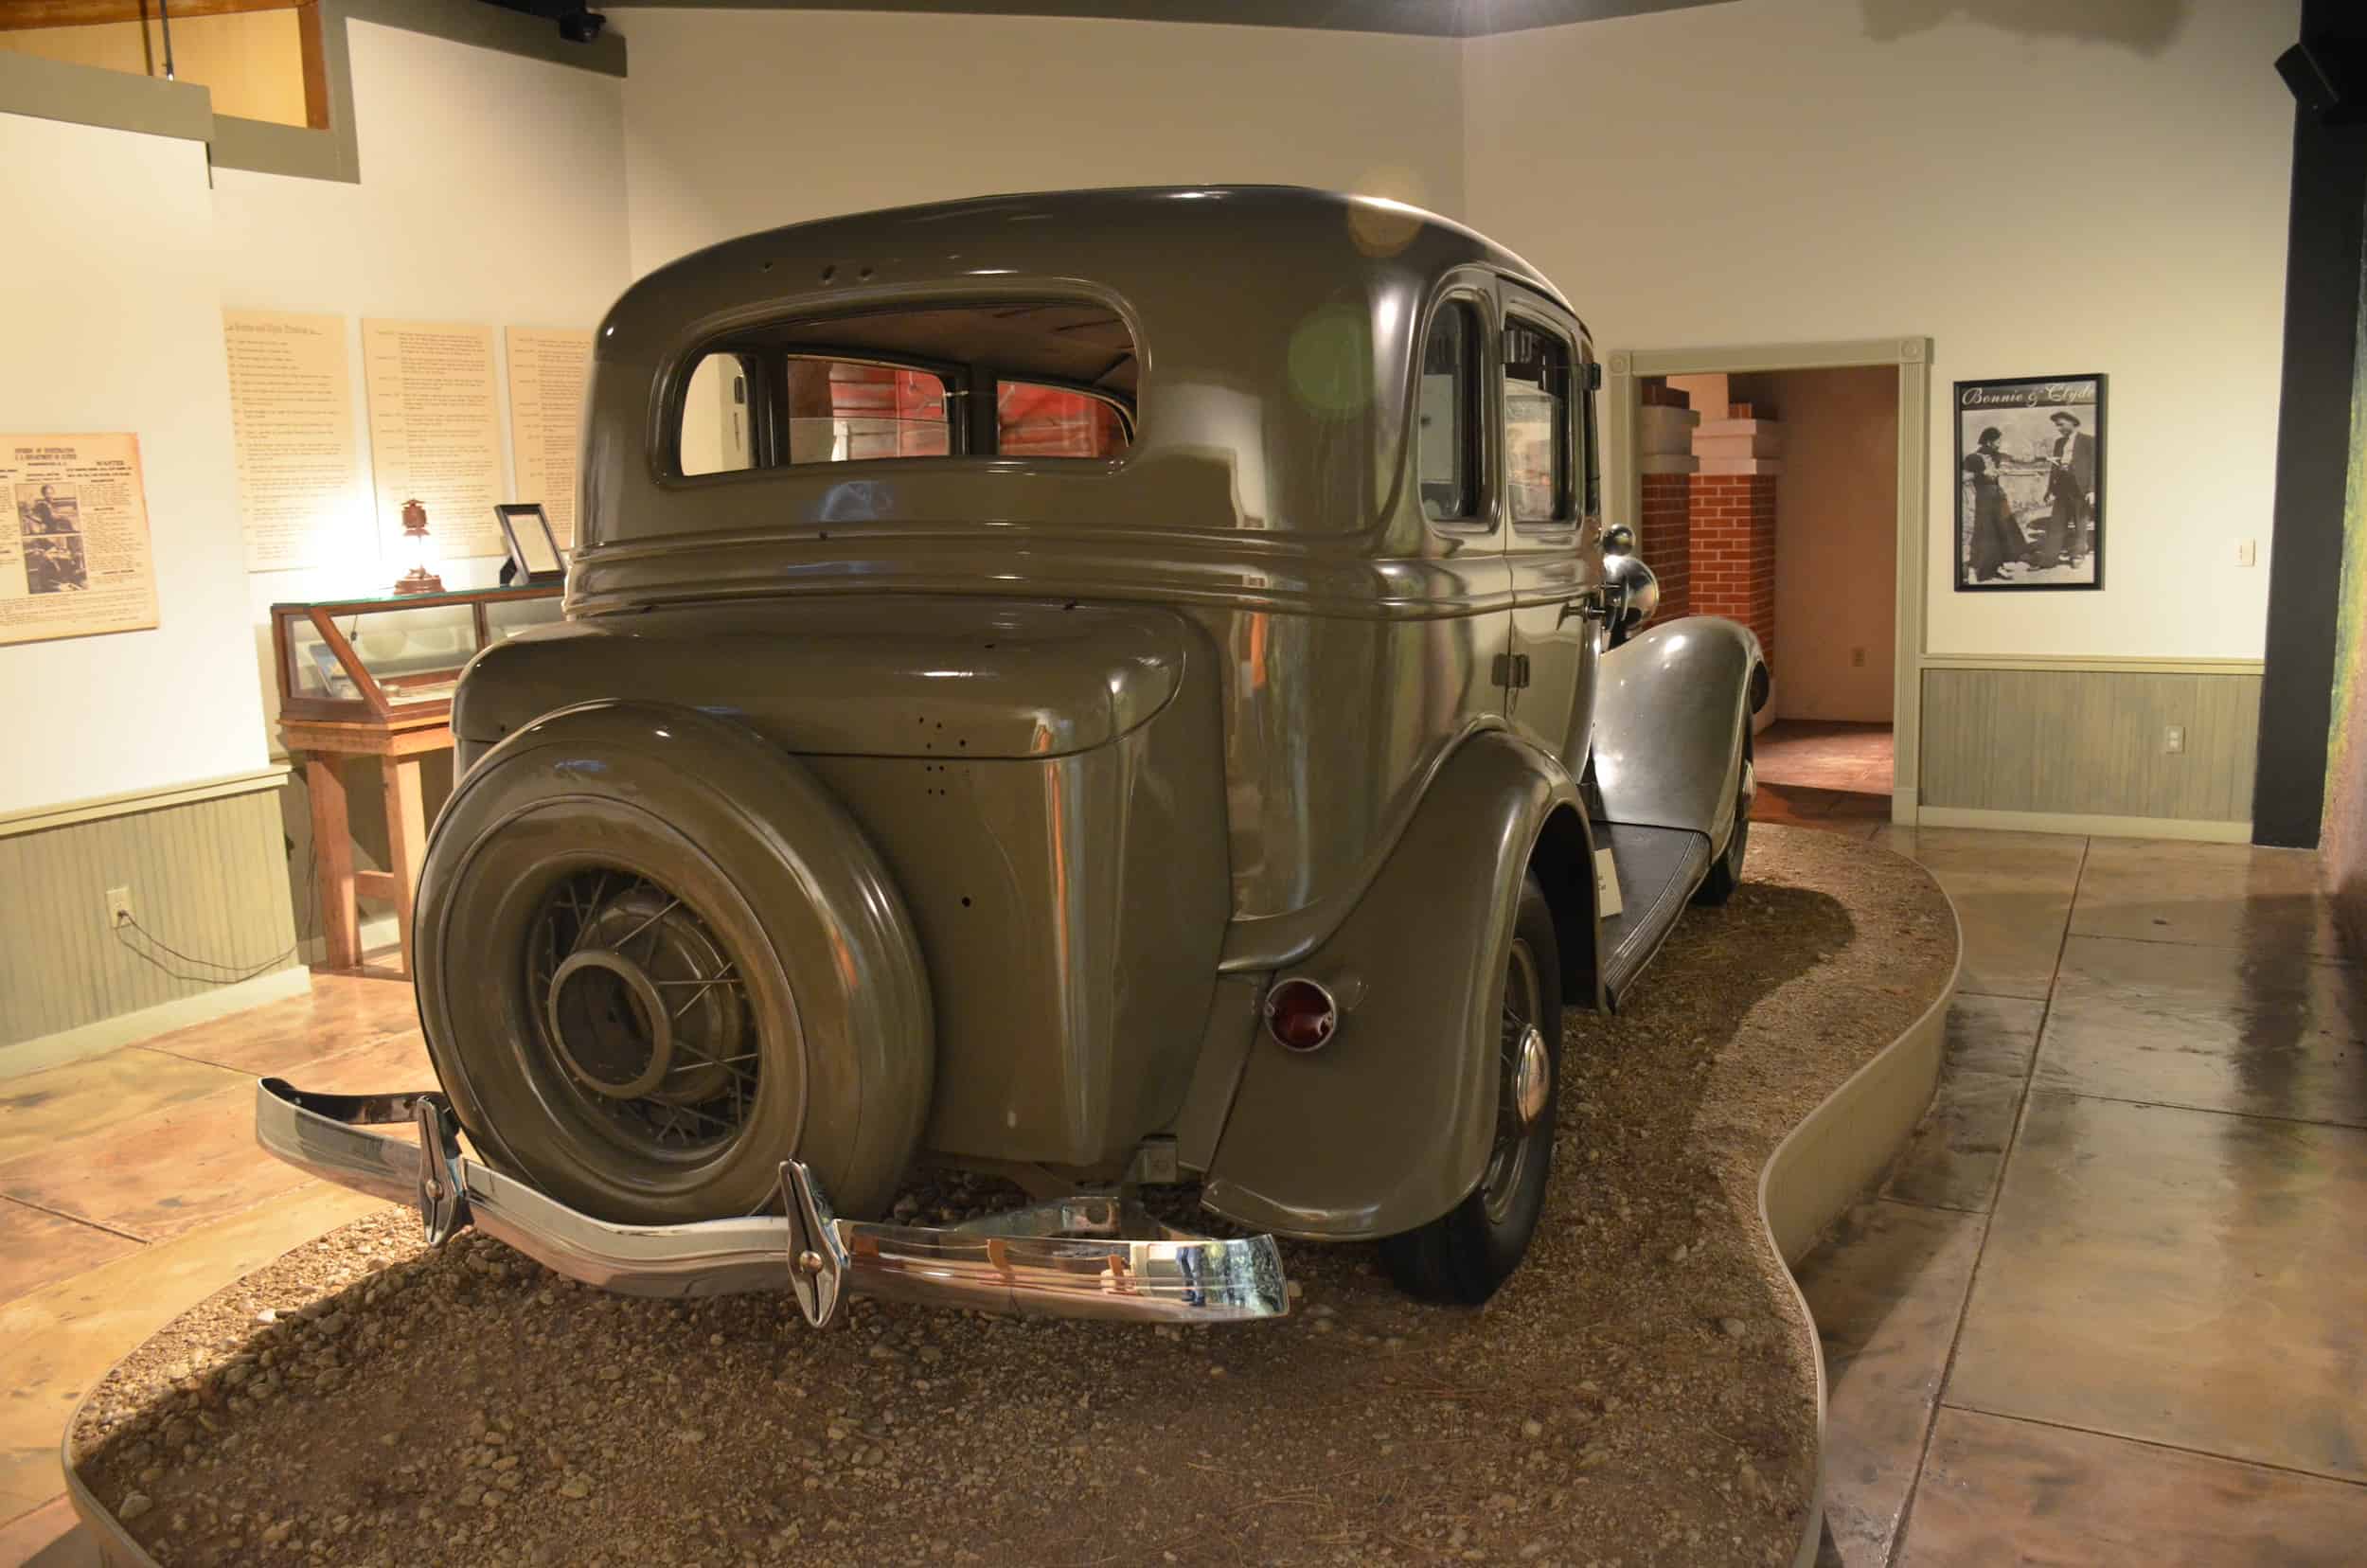 Rear of the Bonnie and Clyde car at the Texas Ranger Museum in San Antonio, Texas